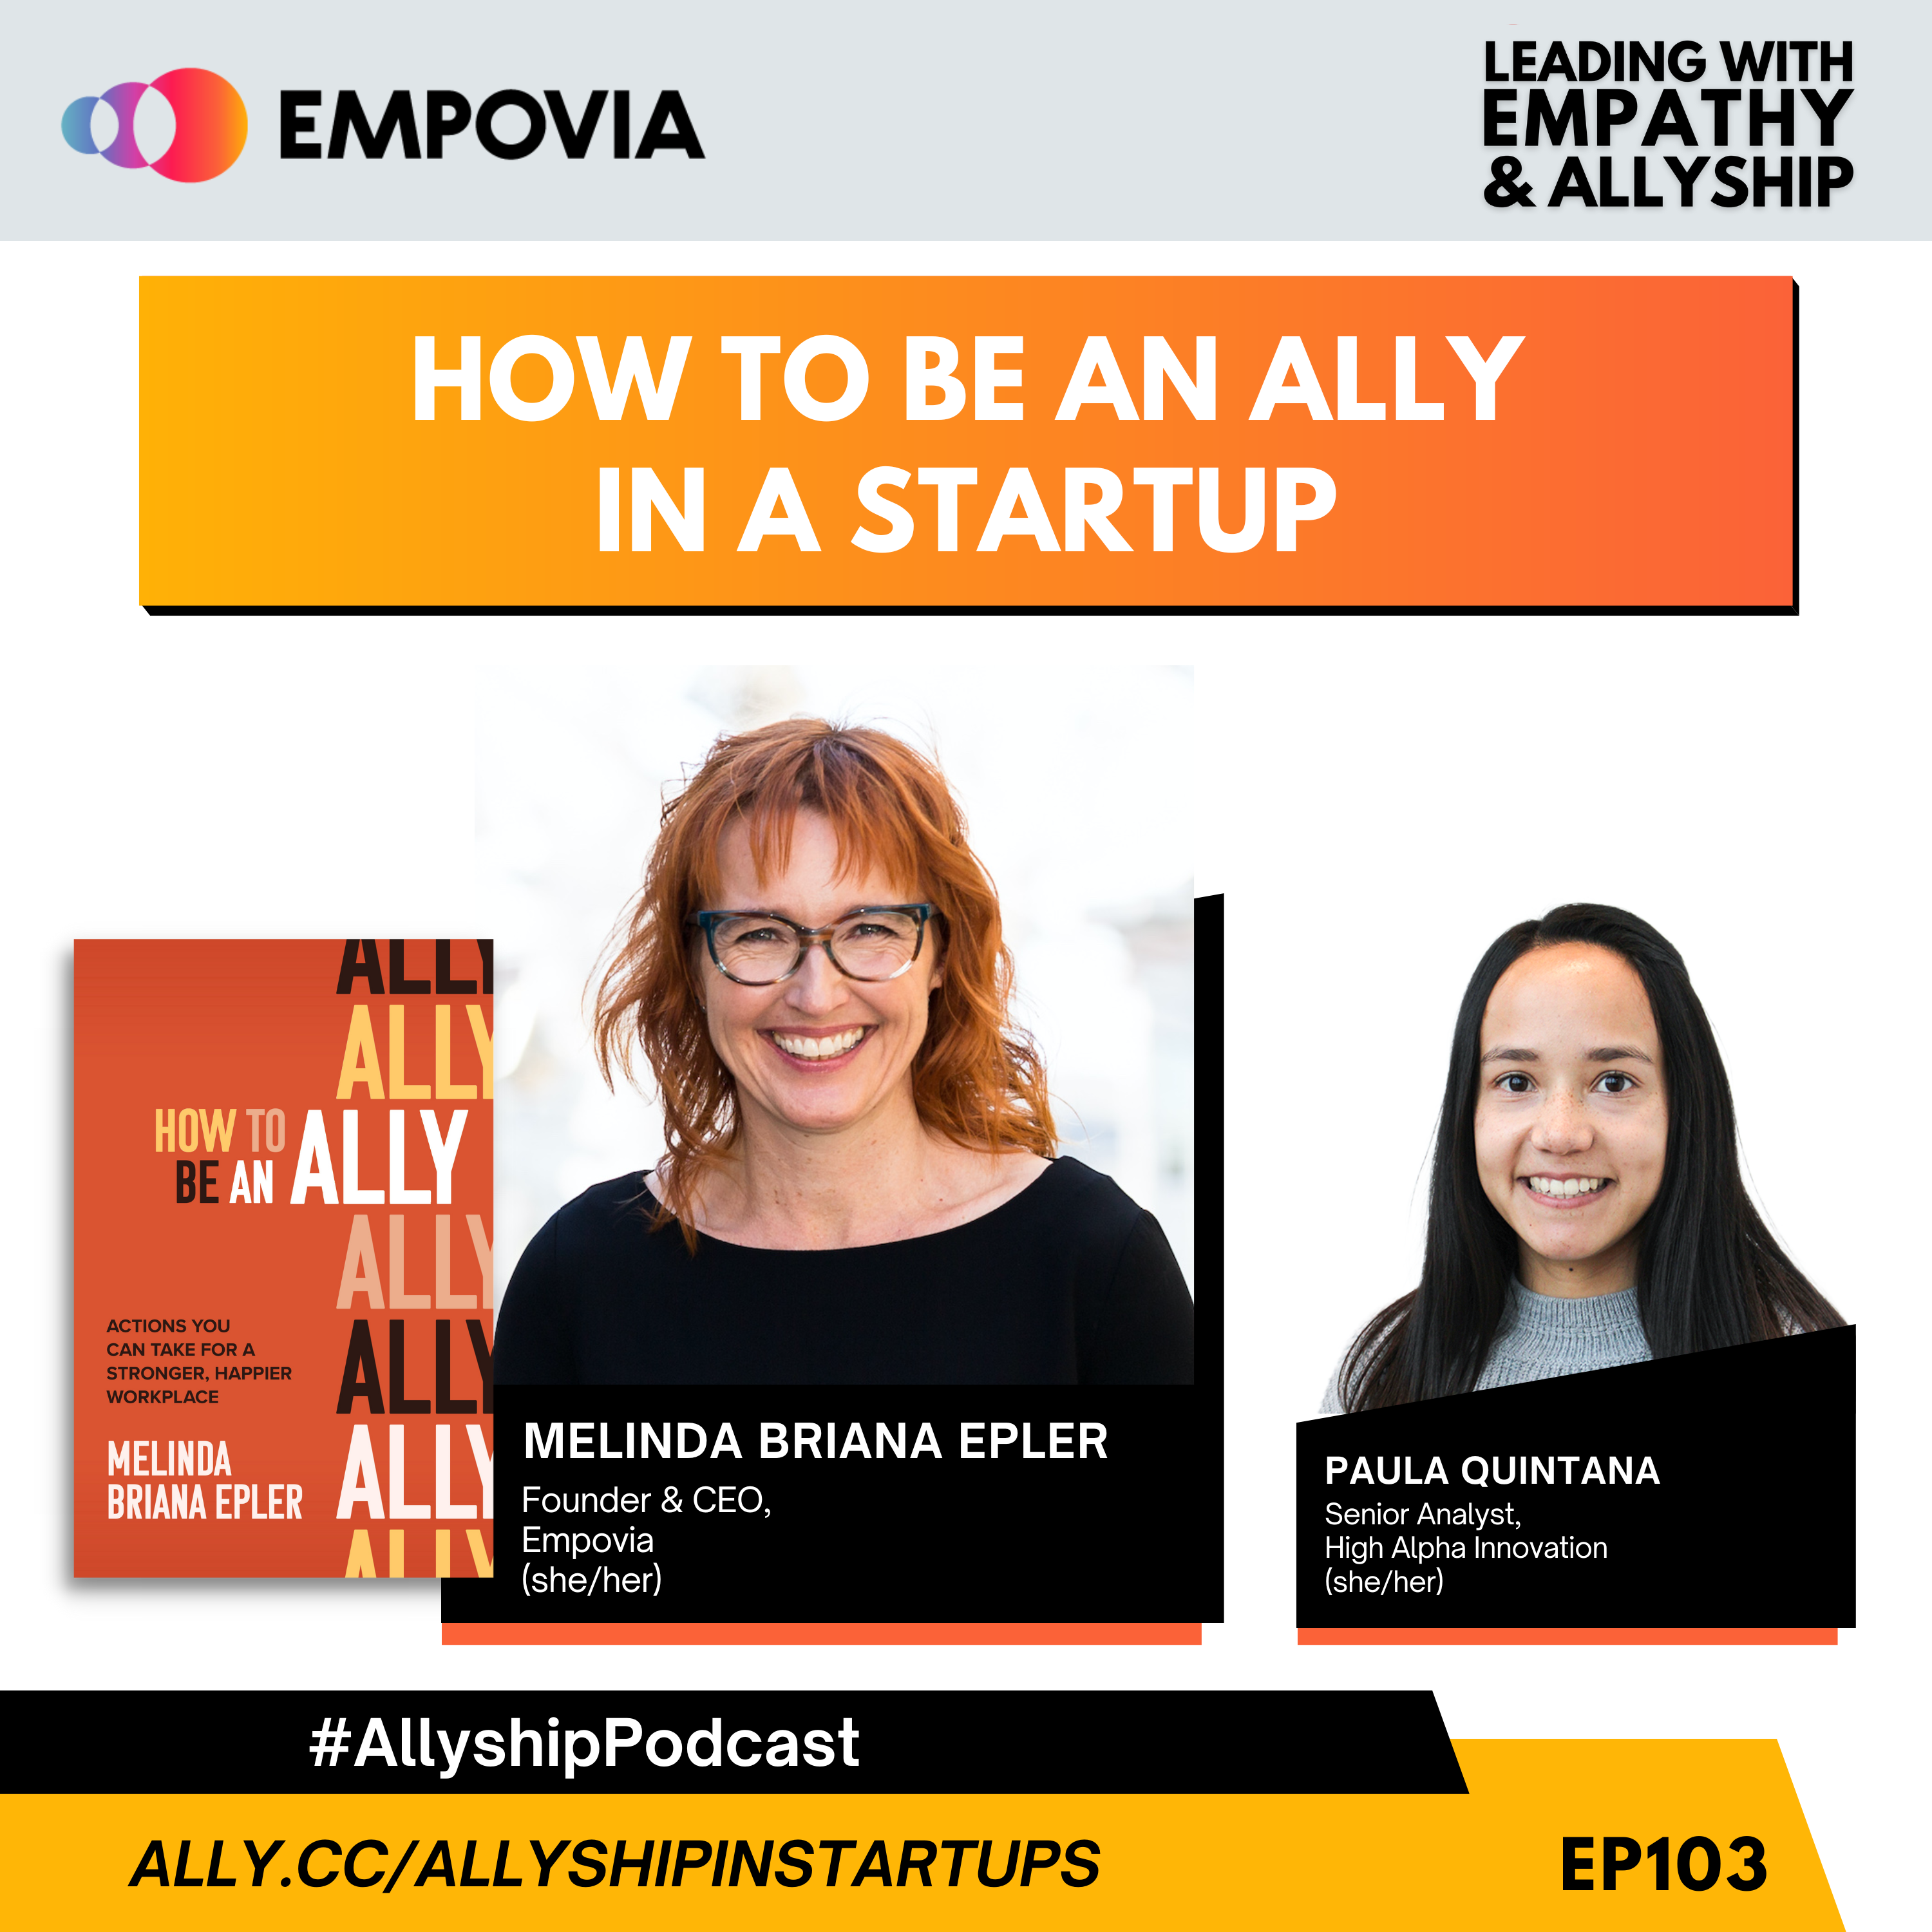 Leading With Empathy & Allyship promo and photos of Melinda Briana Epler, a White woman with red hair, glasses, and black shirt; beside her is the orange book cover of How to Be an Ally (McGraw-Hill); and host Paula Quintana, a Colombian woman with long dark brown hair and light grey knit sweater.